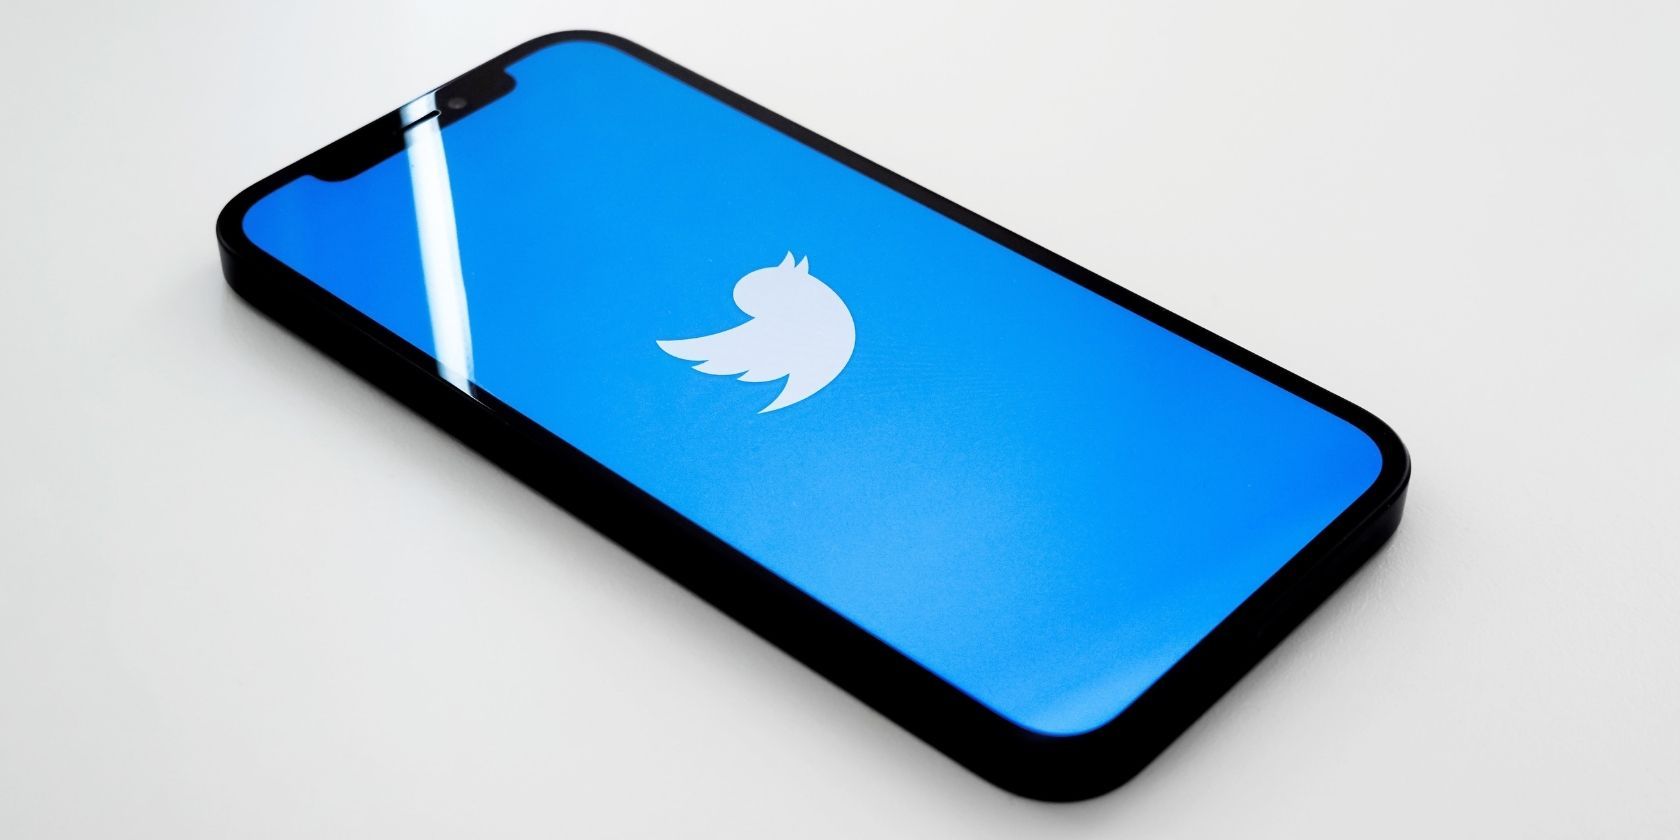 A mobile phone showing the Twitter logo on a blue background